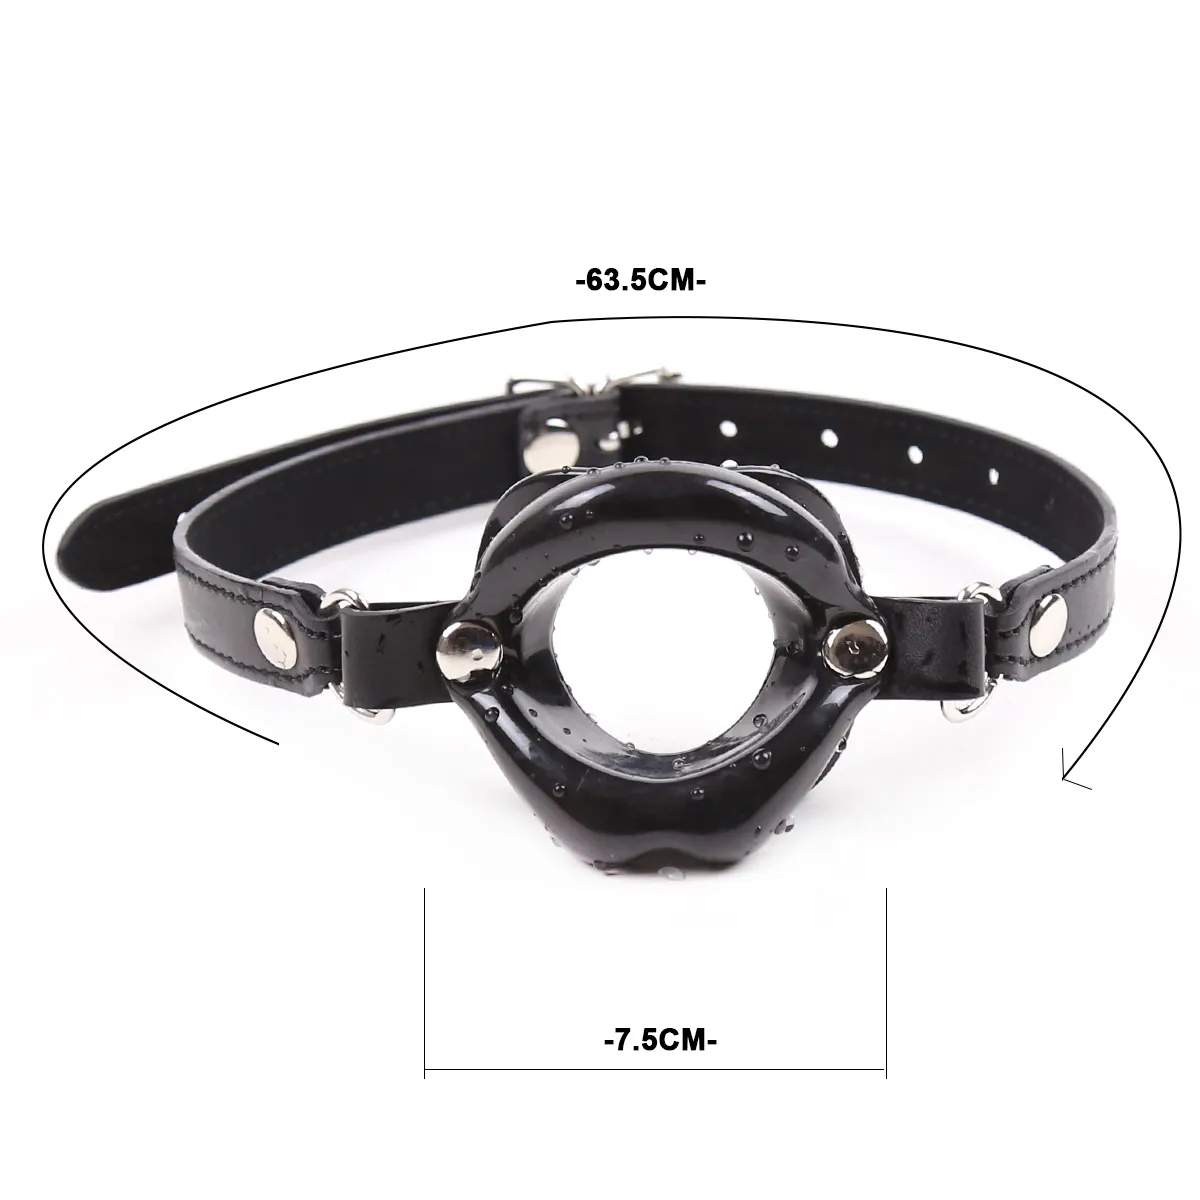 Open Mouth Ring Gag Erotic sexy Toys For Women Couples Slave Bondage Gear Equipment Female BDSM Shop Intimate for adults 18 Games